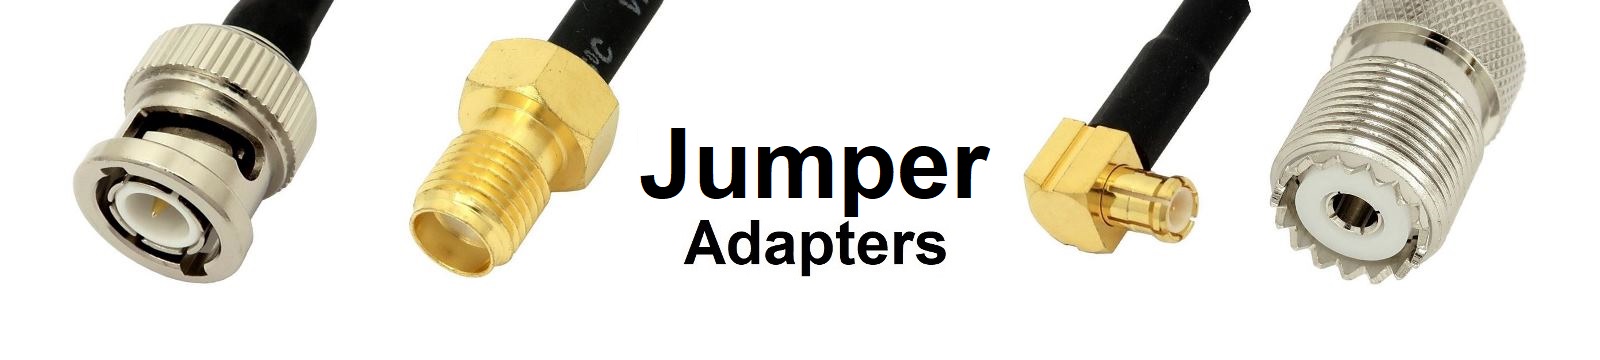 Jumper Adapters Category Banner - Max-Gain Systems, Inc.